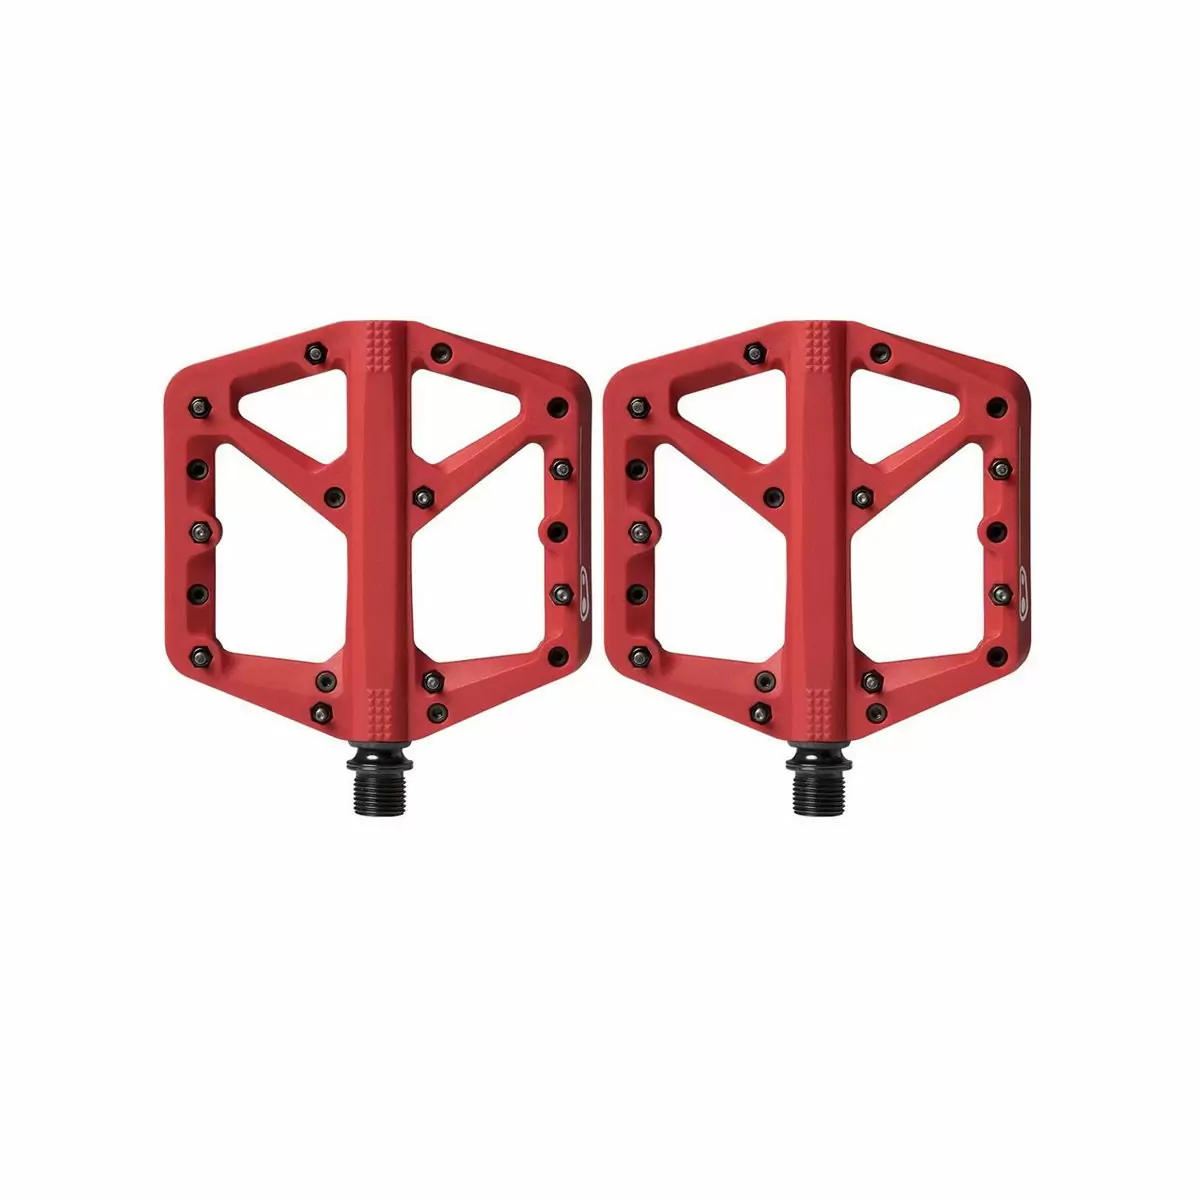 Pair of pedals Stamp 1 Large red - image